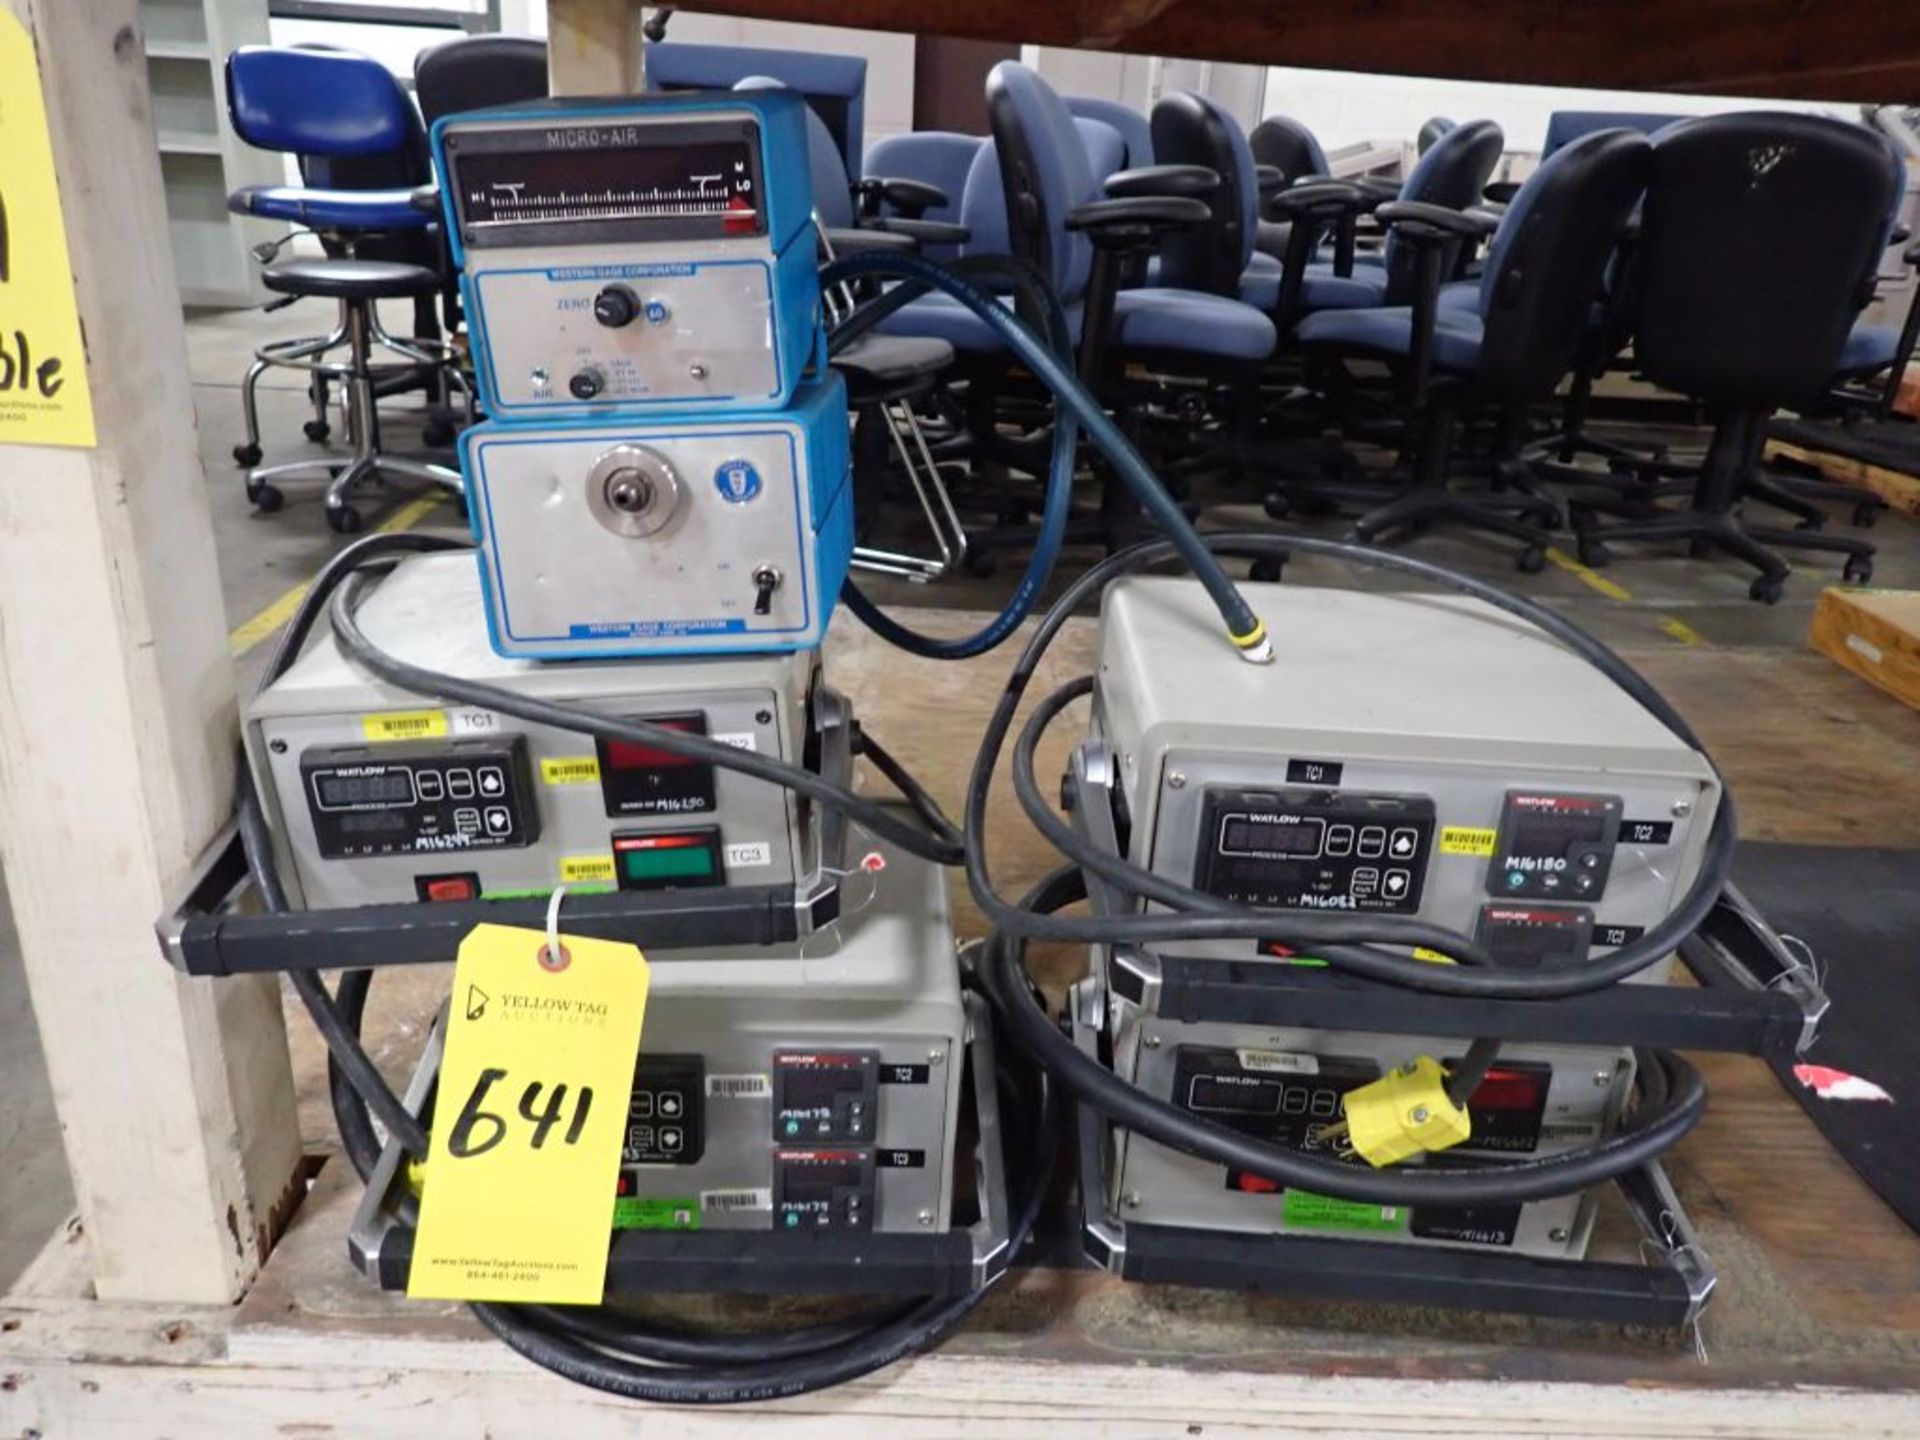 Lot of Digital Meters | Tag: 241641 | Limited Forklift Assistance Available - $10.00 Lot Loading